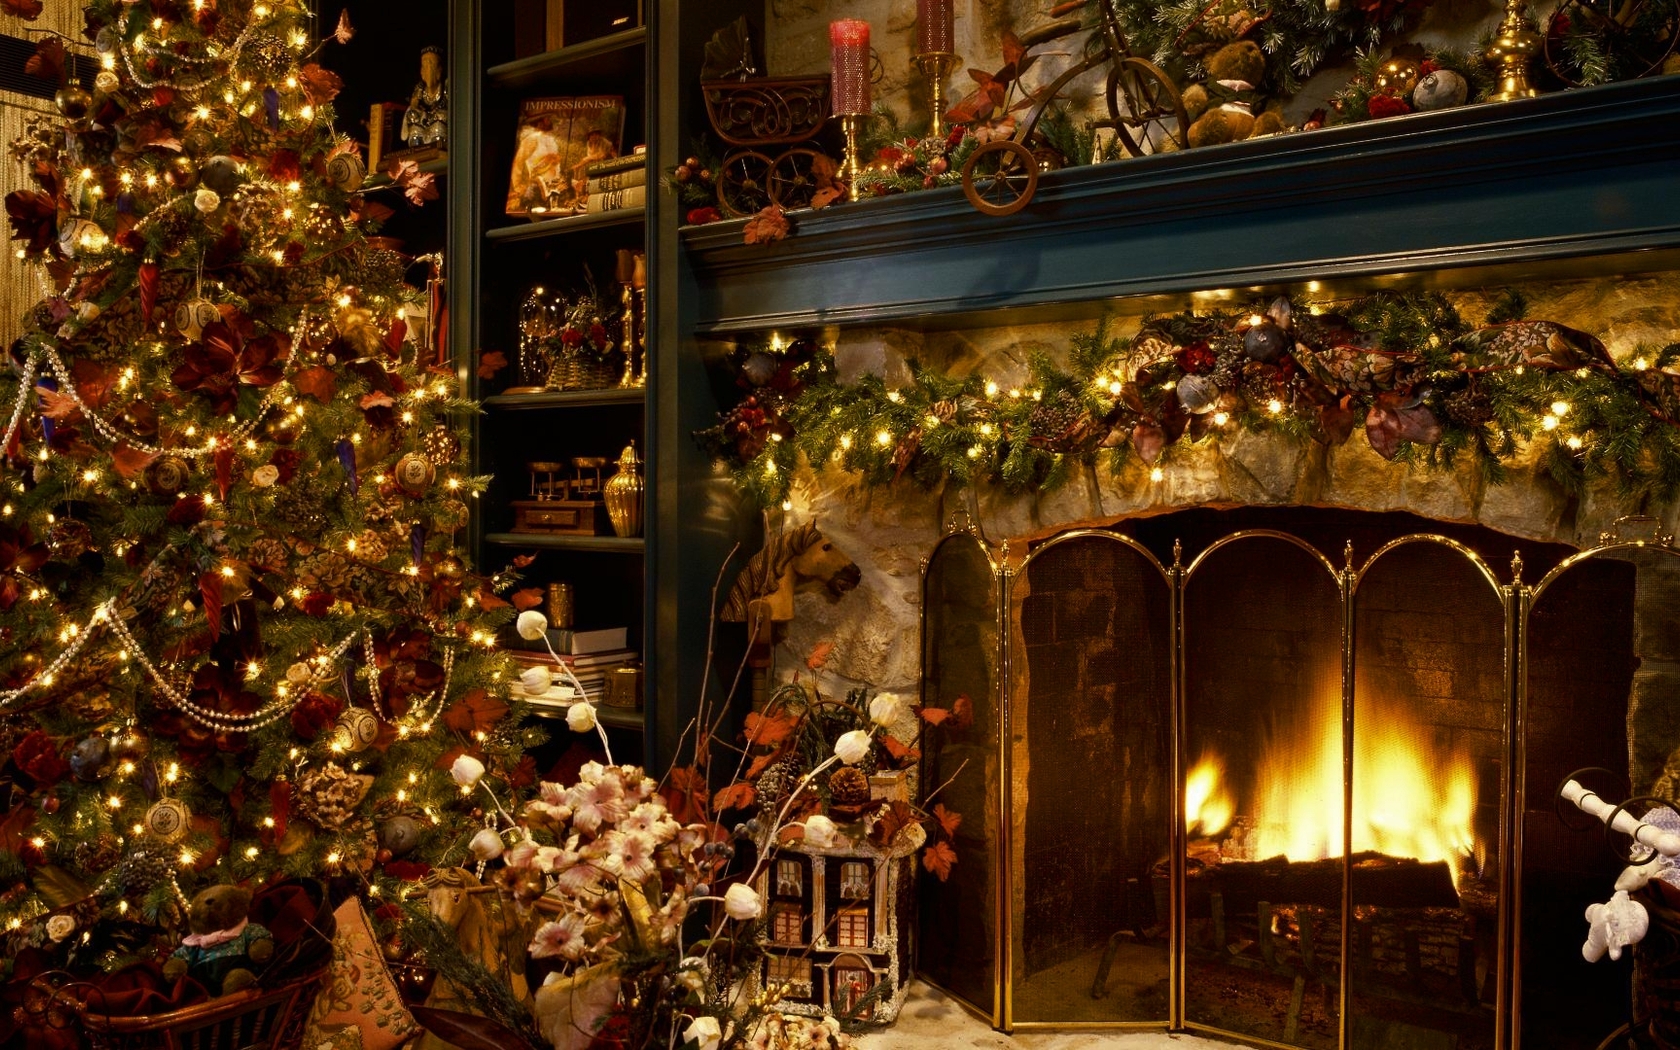 Christmas Fireplace Wallpaper Related Keywords